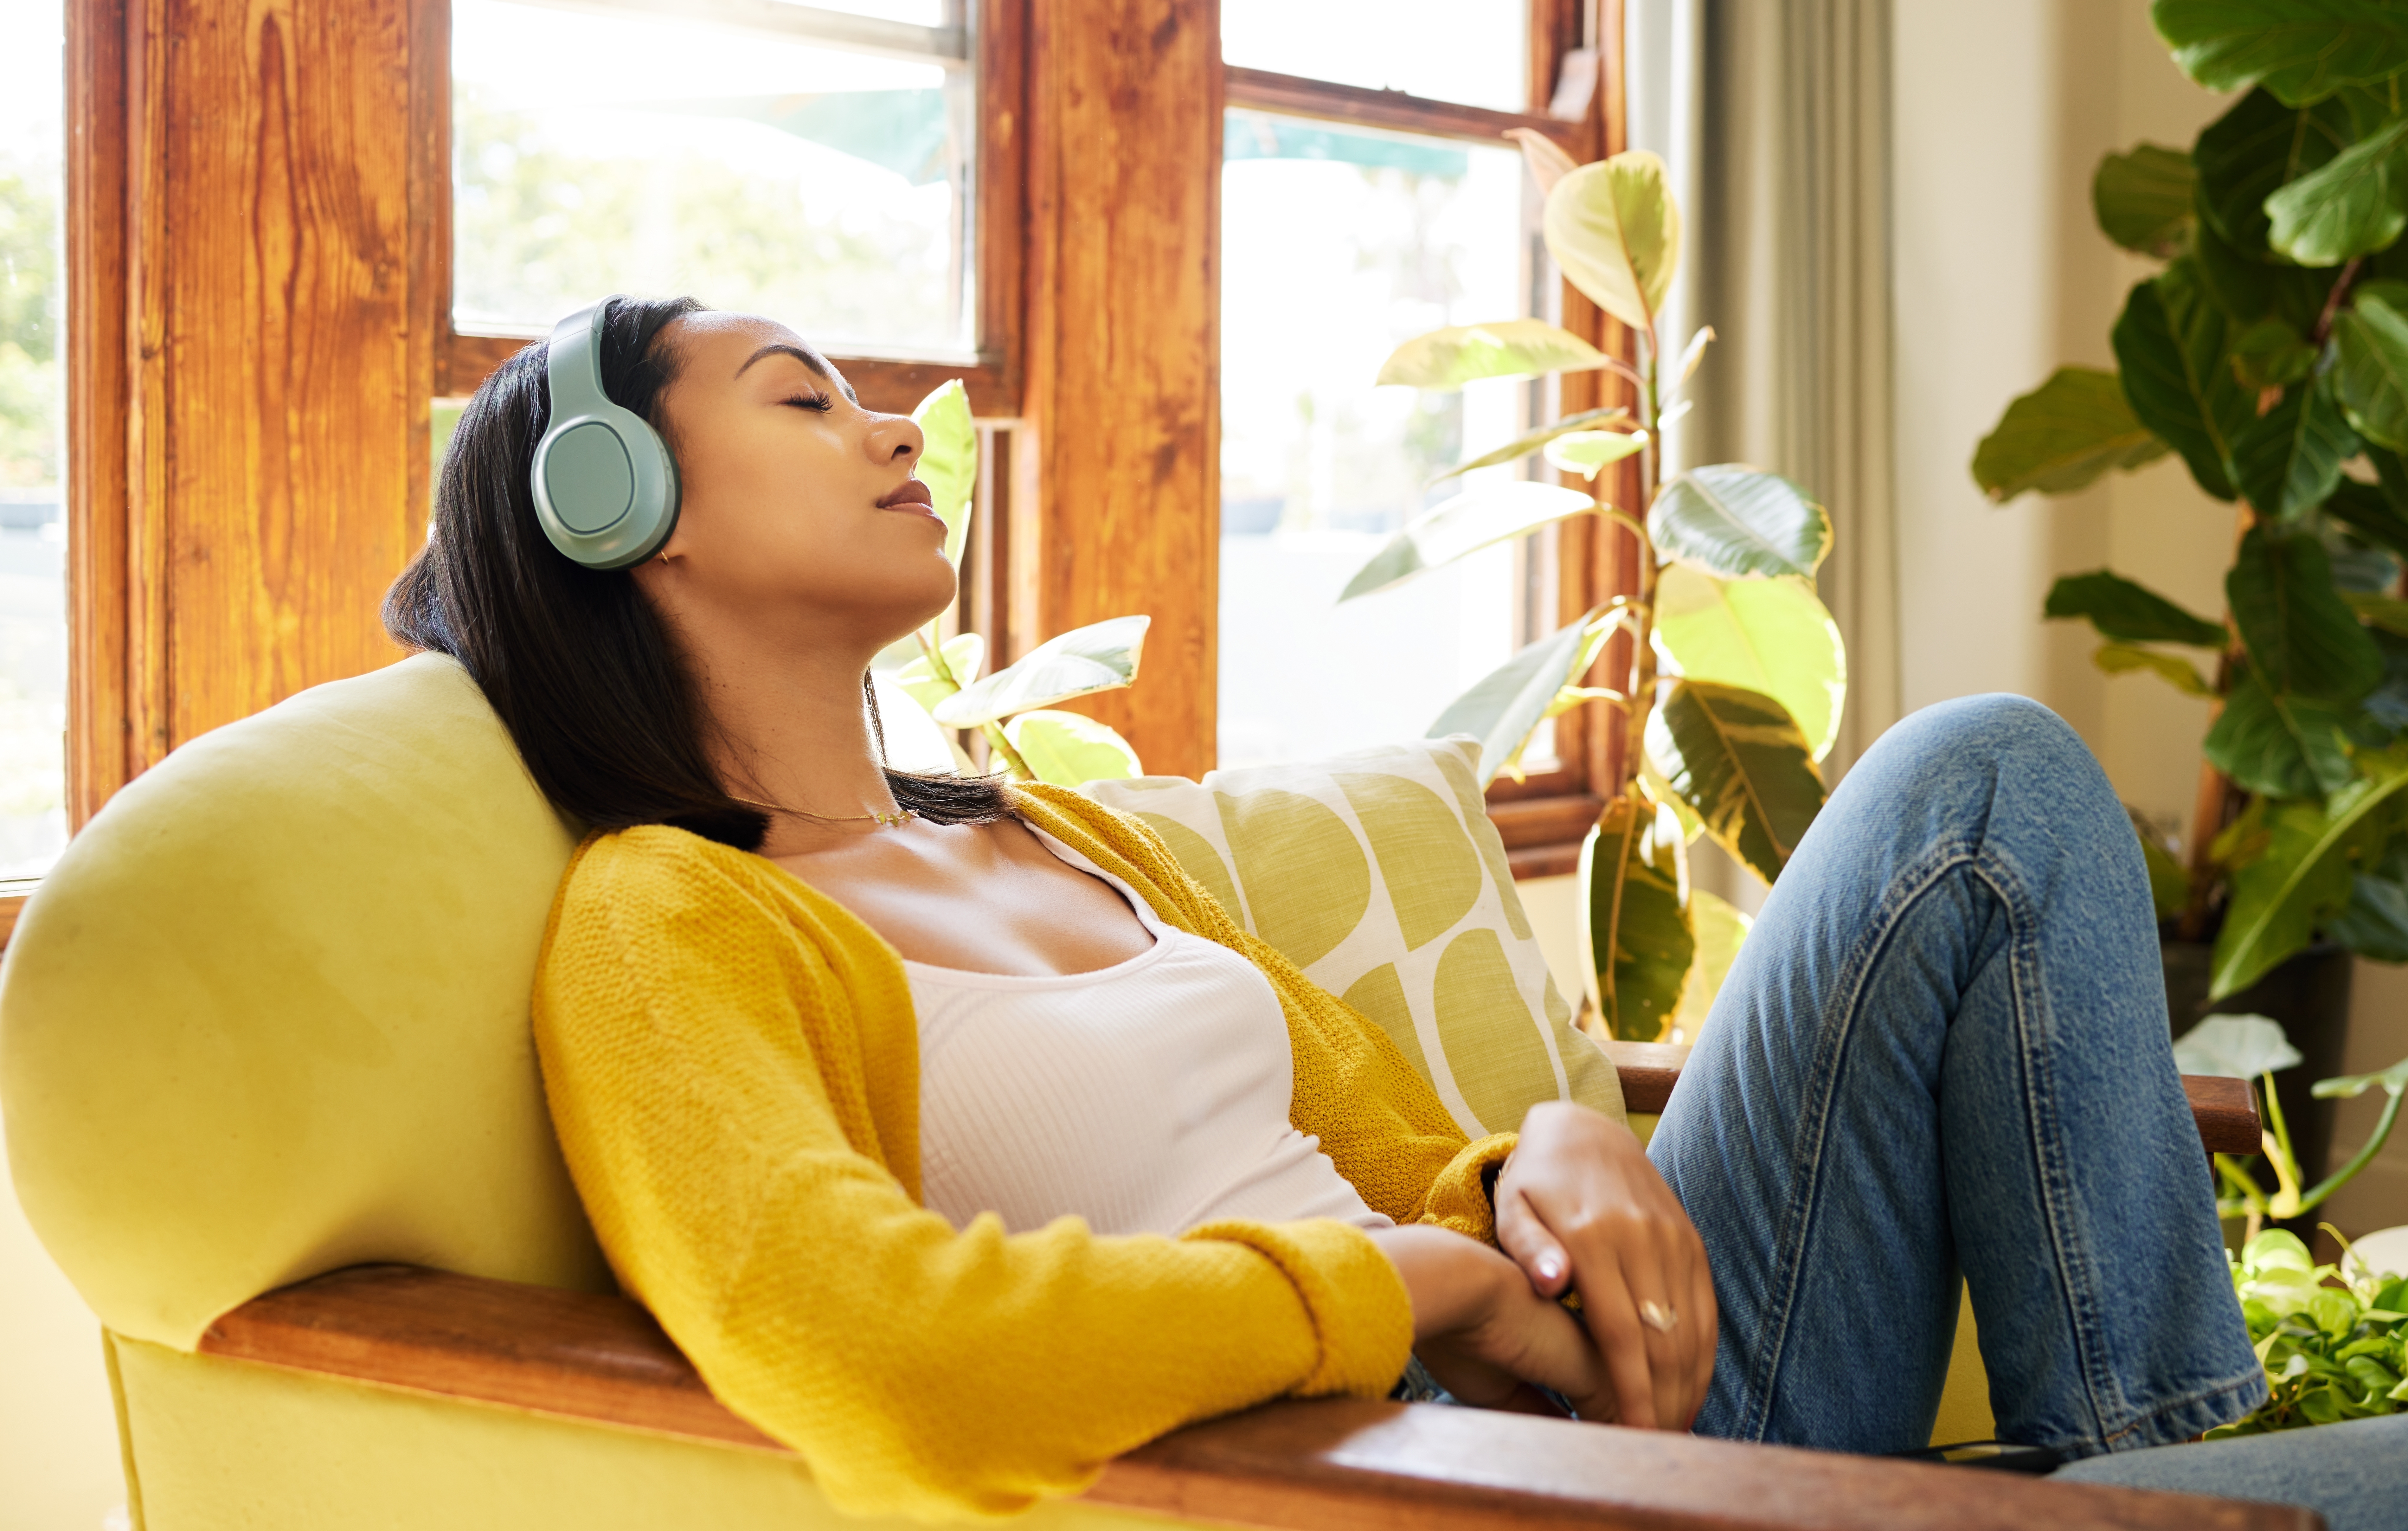 Woman relaxing with headphones on, self care